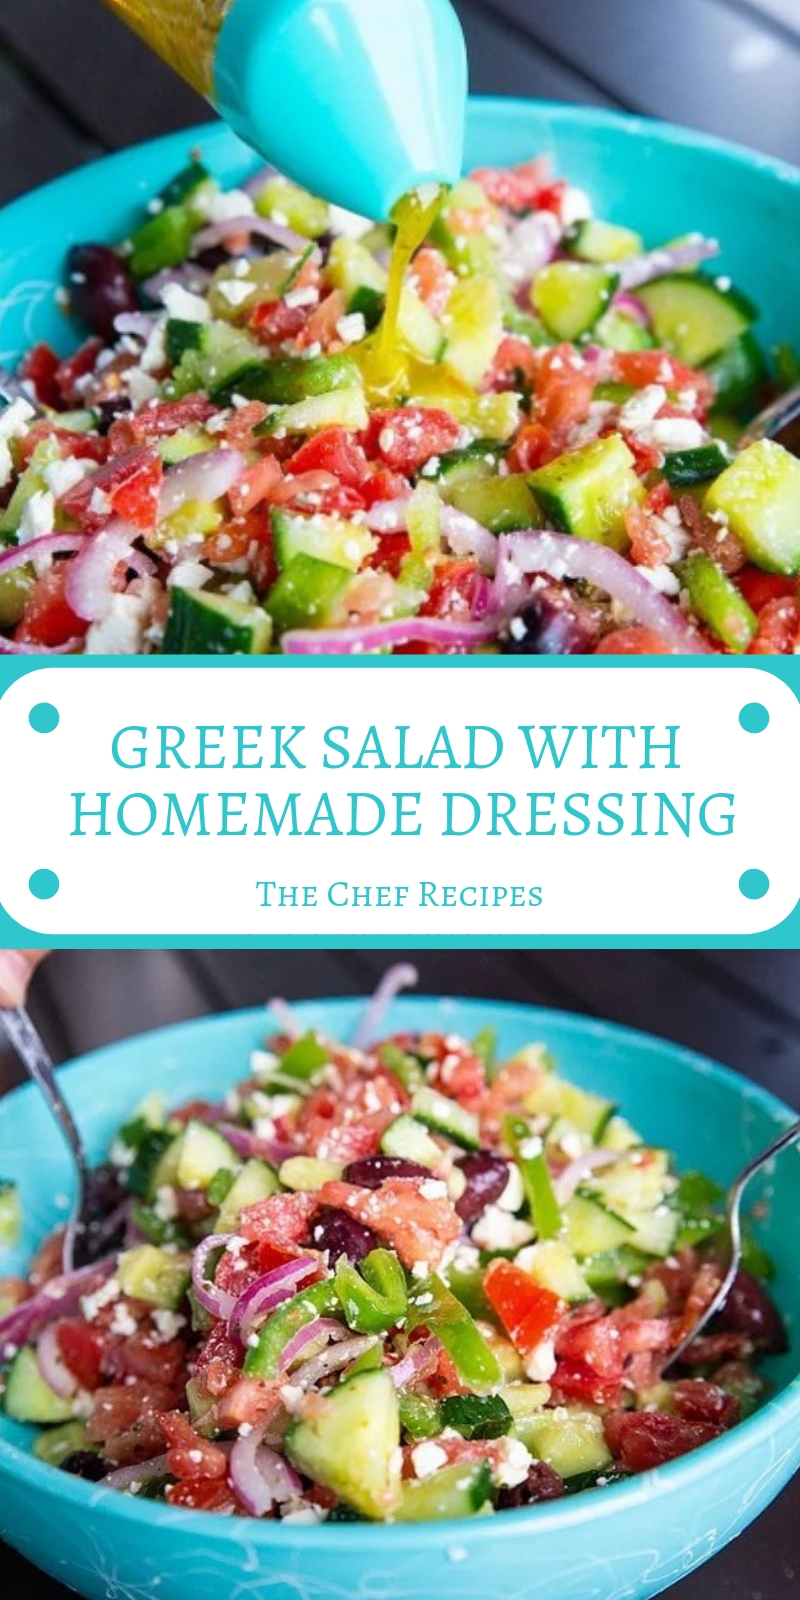 GREEK SALAD WITH HOMEMADE DRESSING